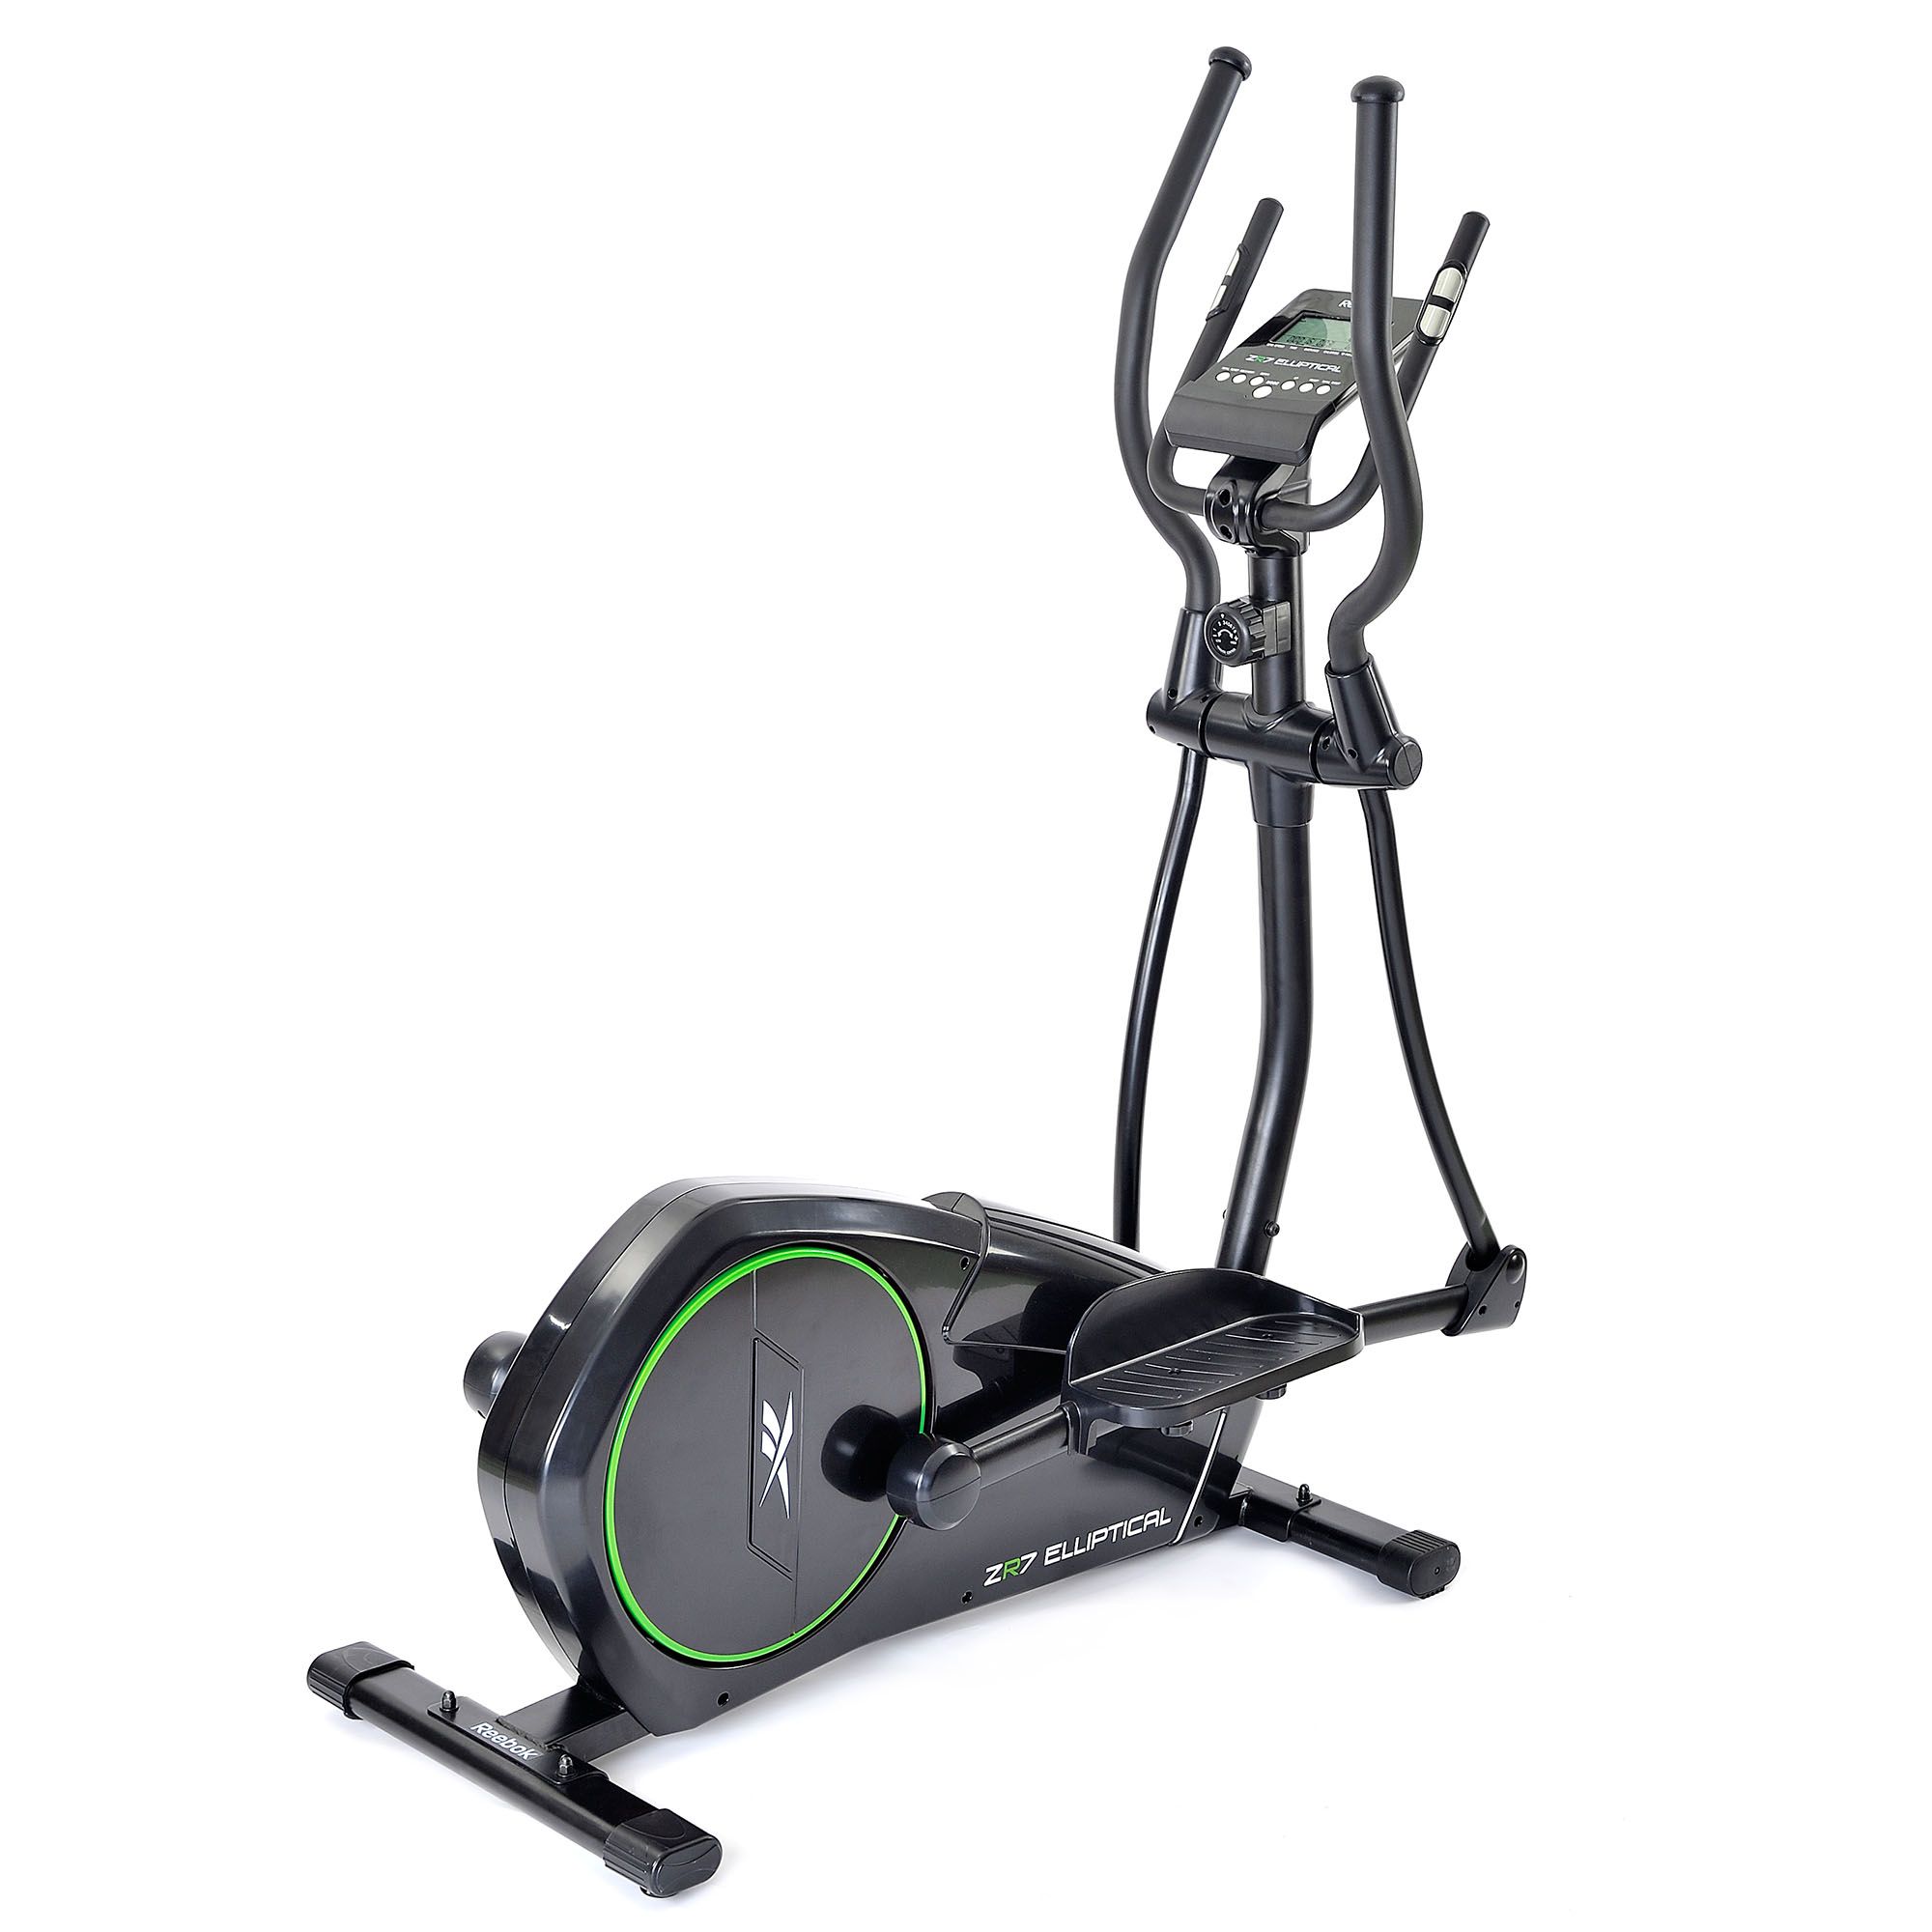 ZR7 Elliptical Trainer Review - Z7 Replacement